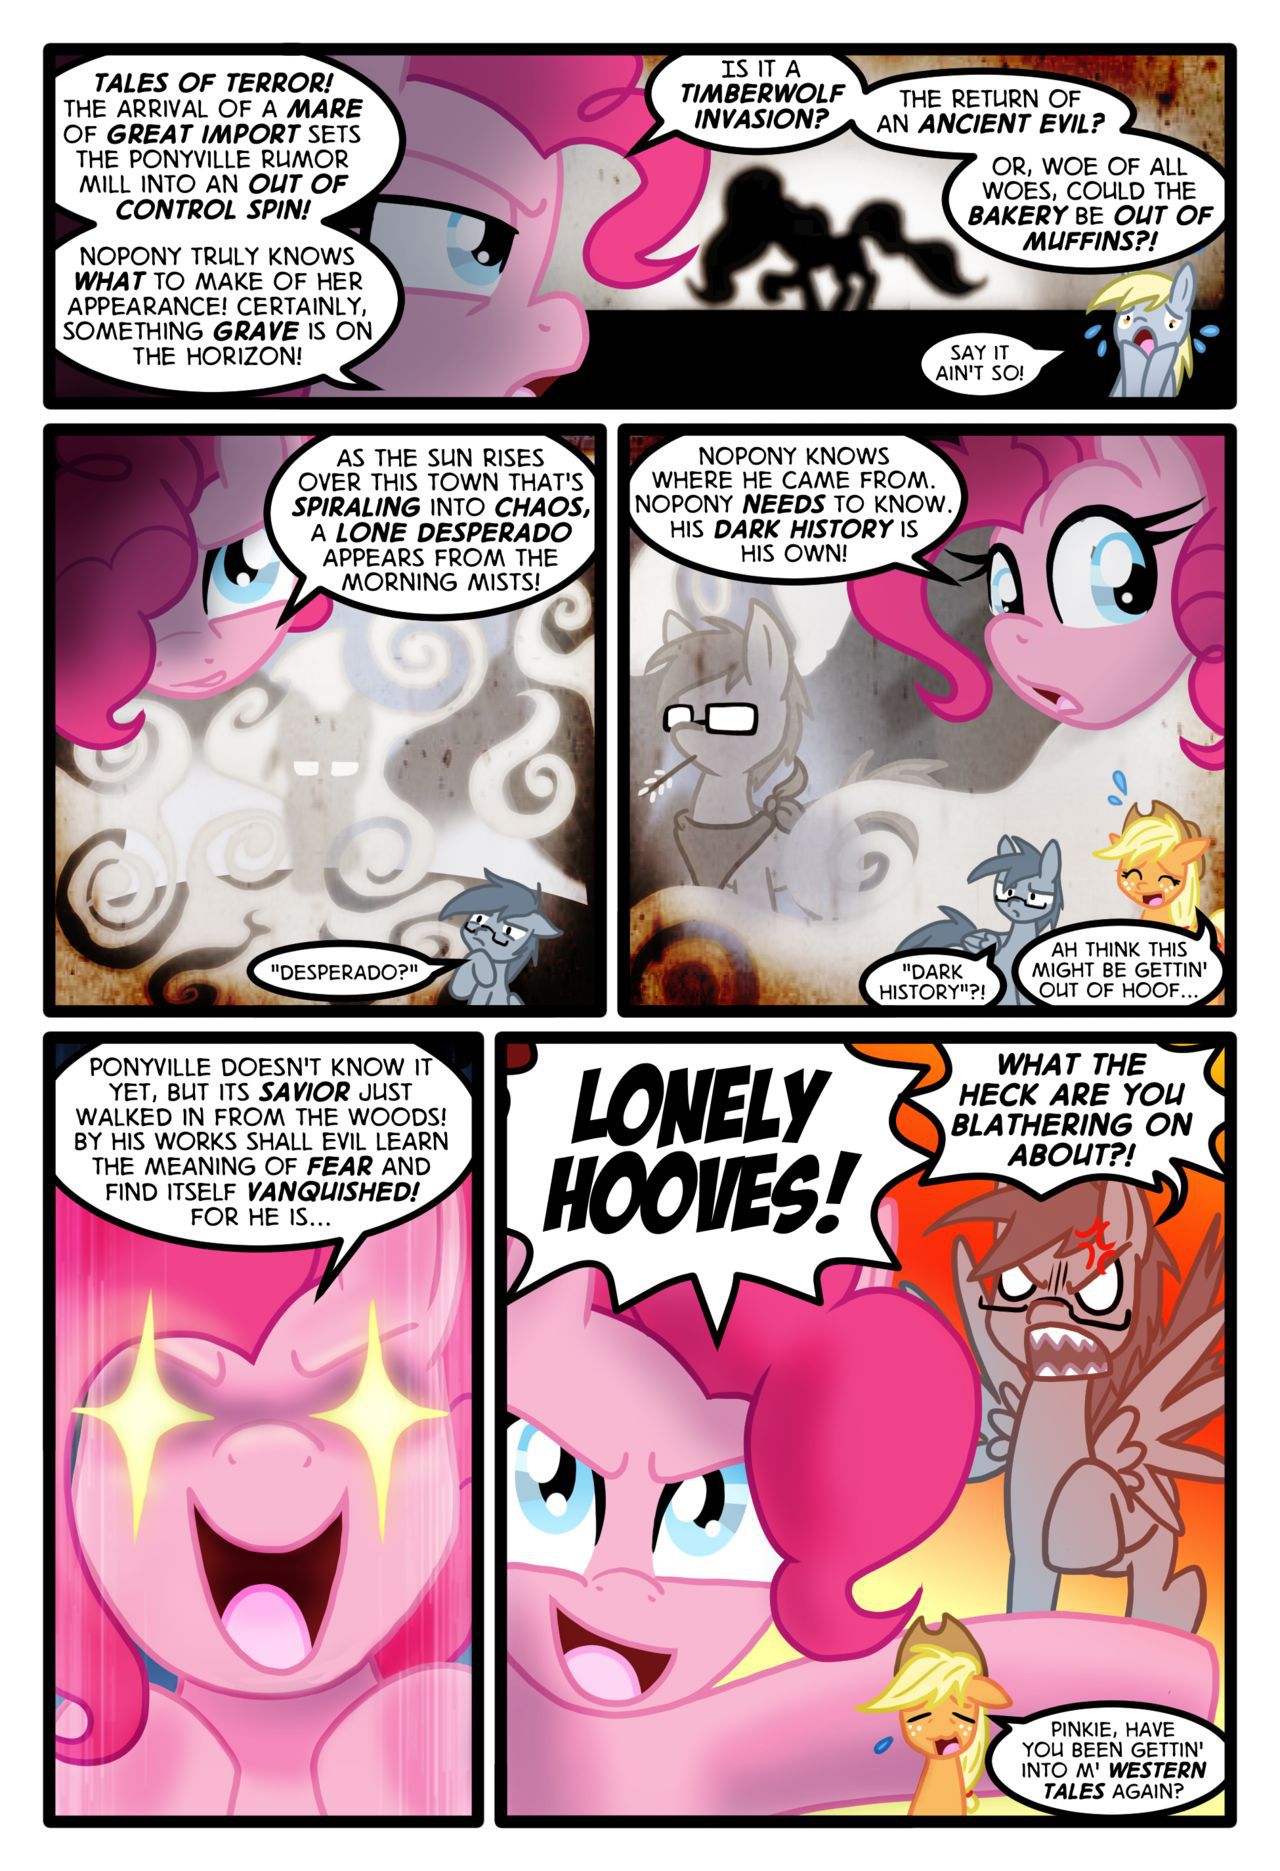 [Zaron] Lonely Hooves (My Little Pony Friendship Is Magic) [Ongoing] 21